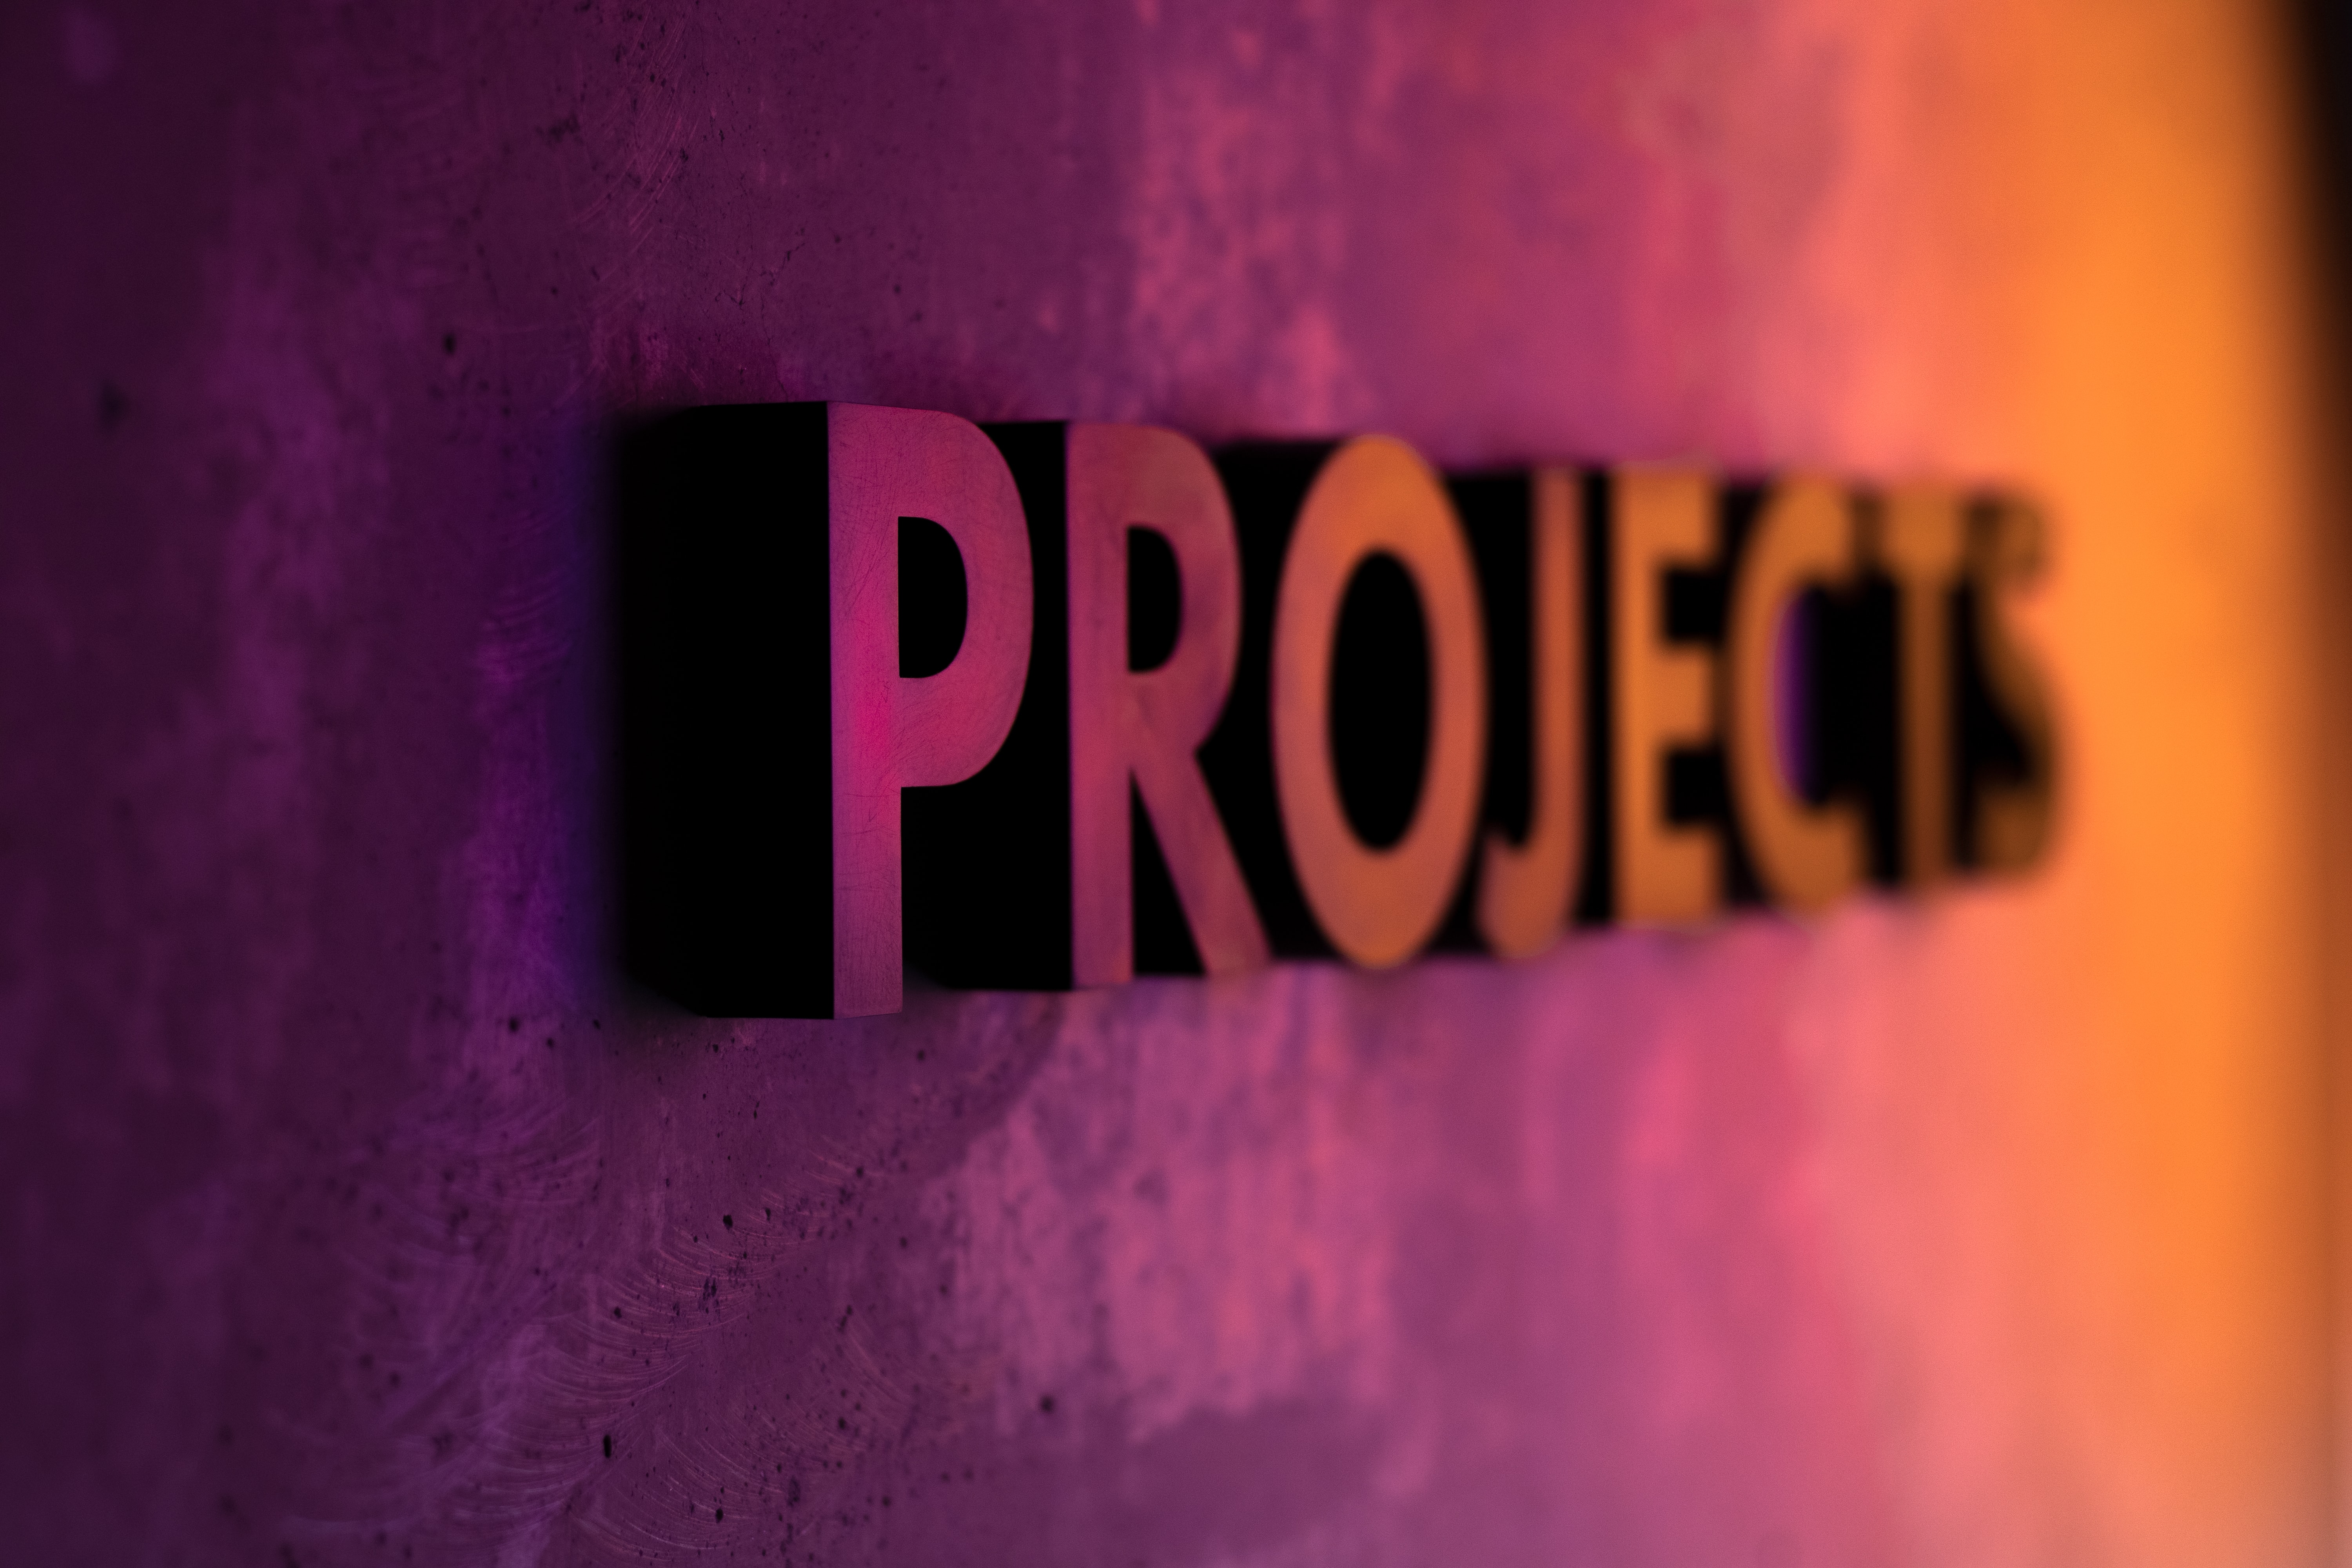 the word "projects" appears in 3D from a wall